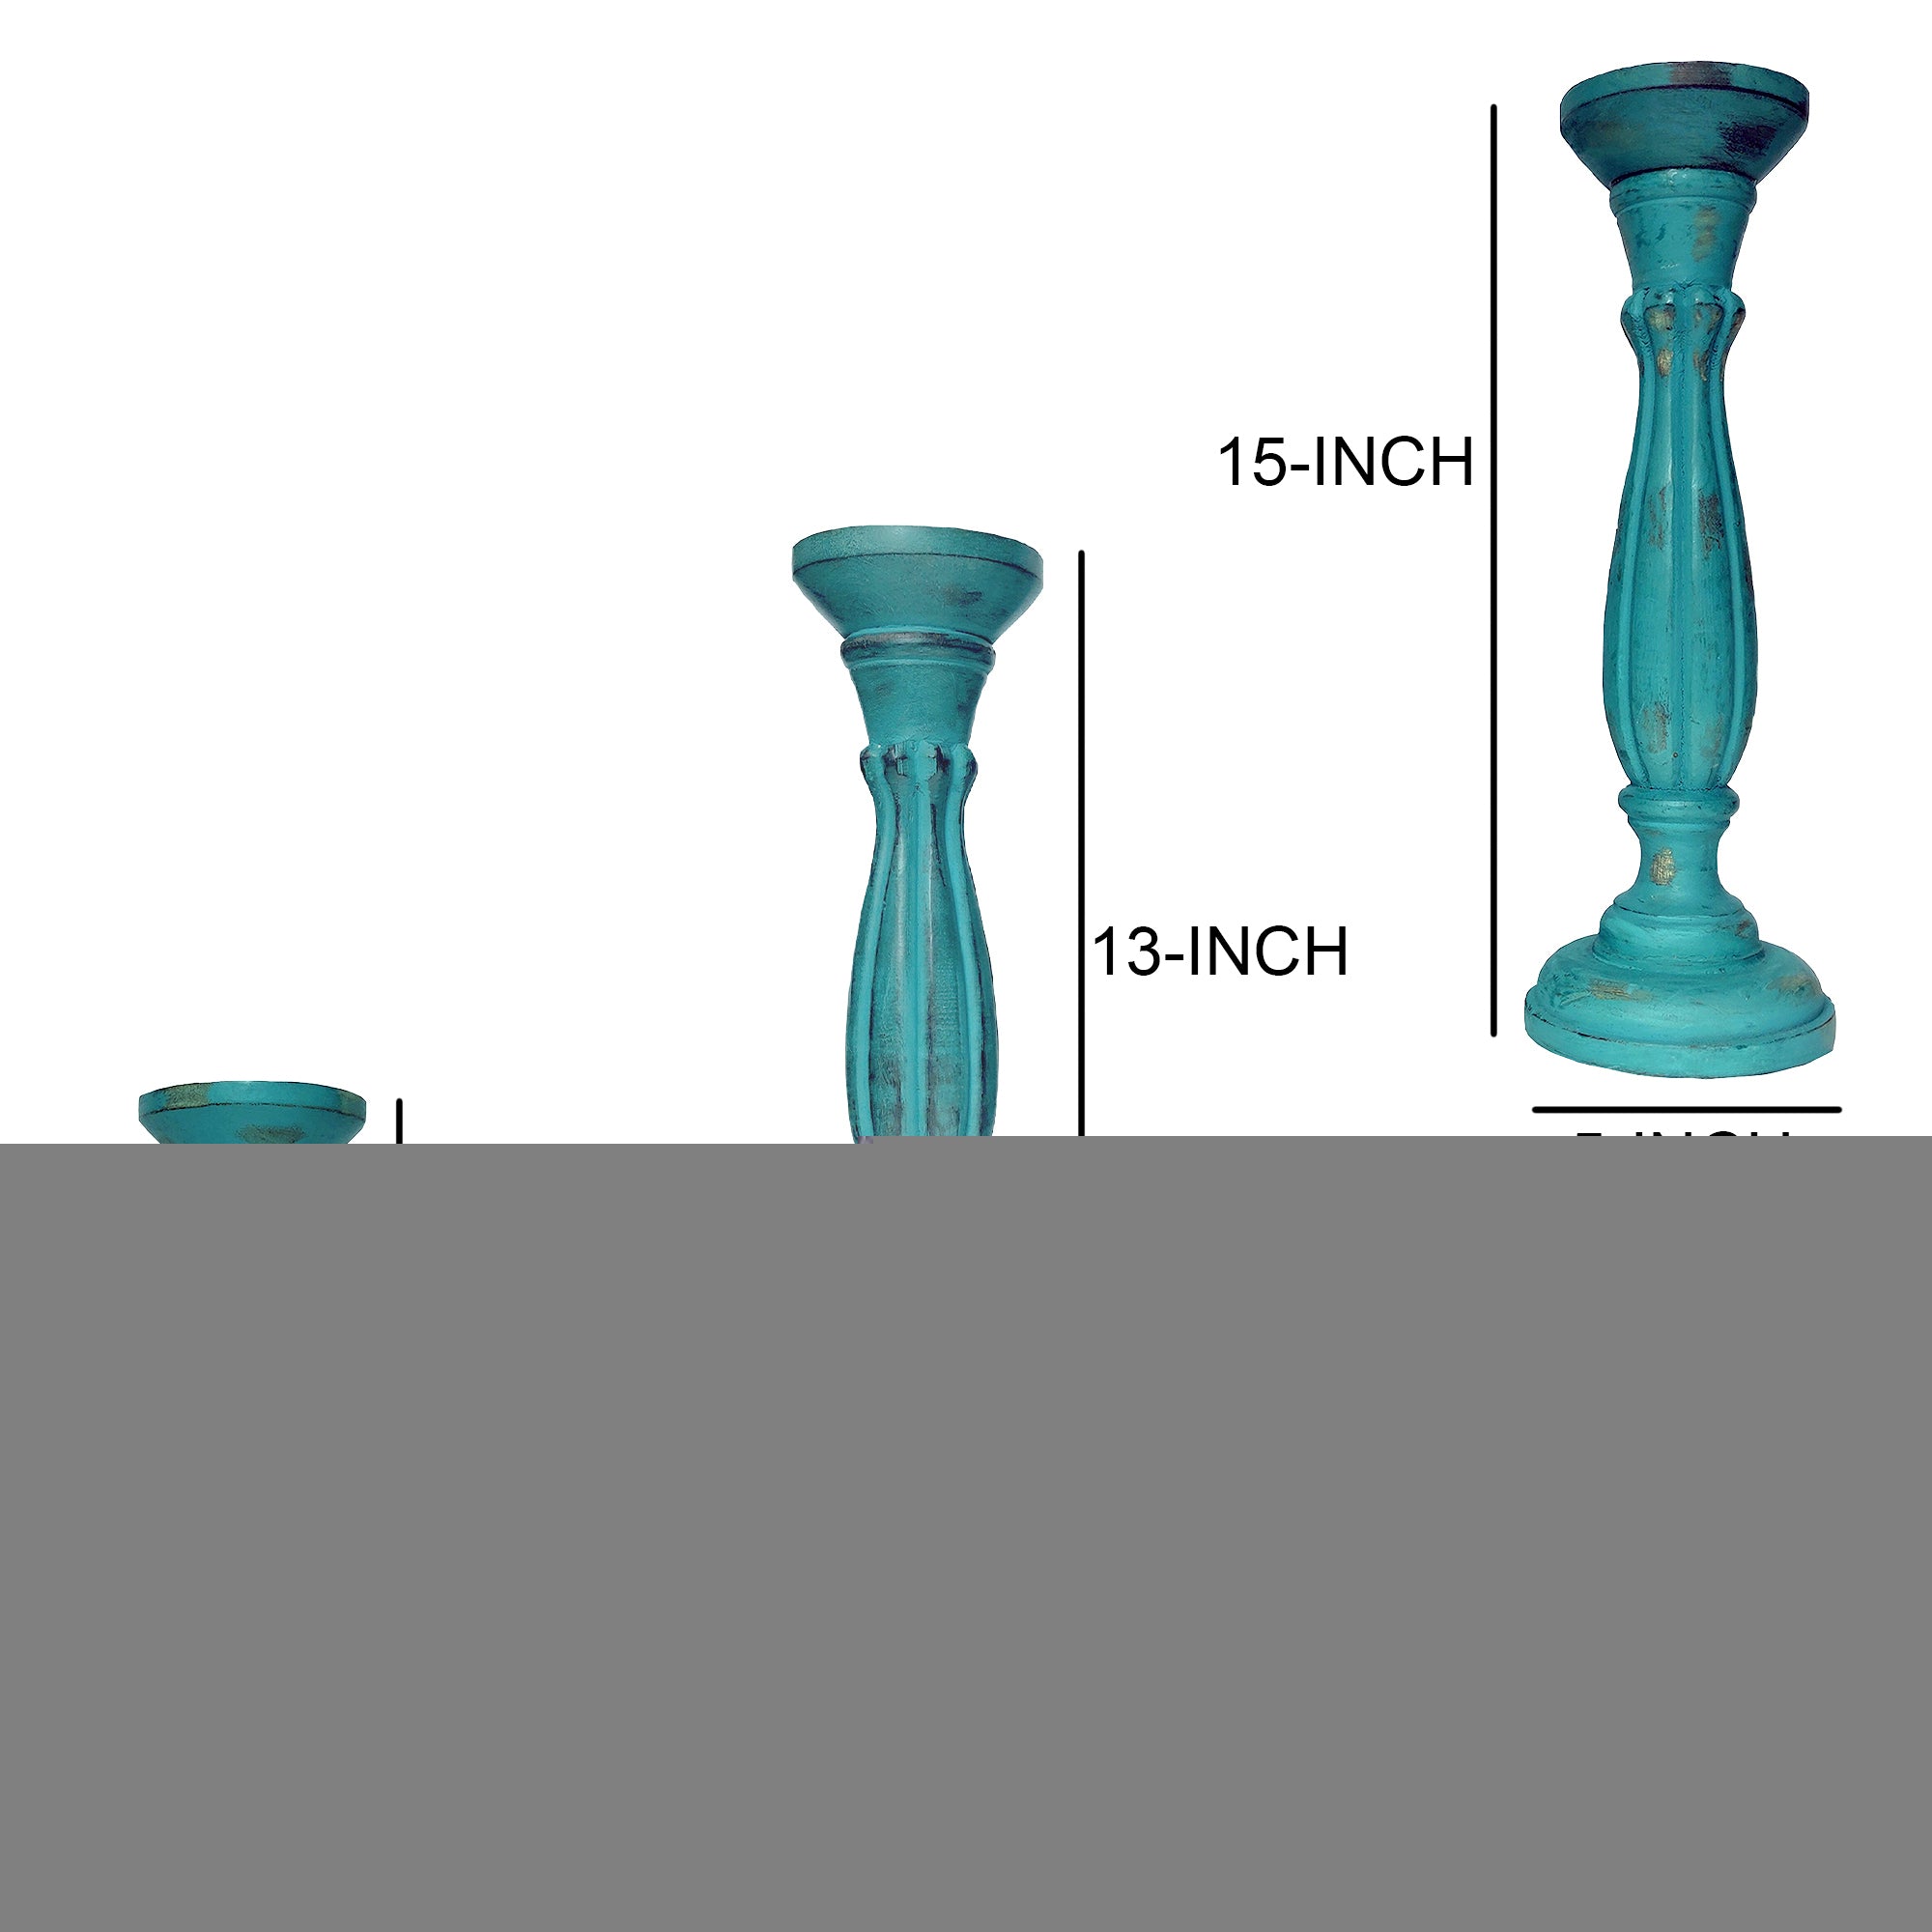 Handmade Wooden Candle Holder with Pillar Base Support (Set of 3) - Turquoise Blue